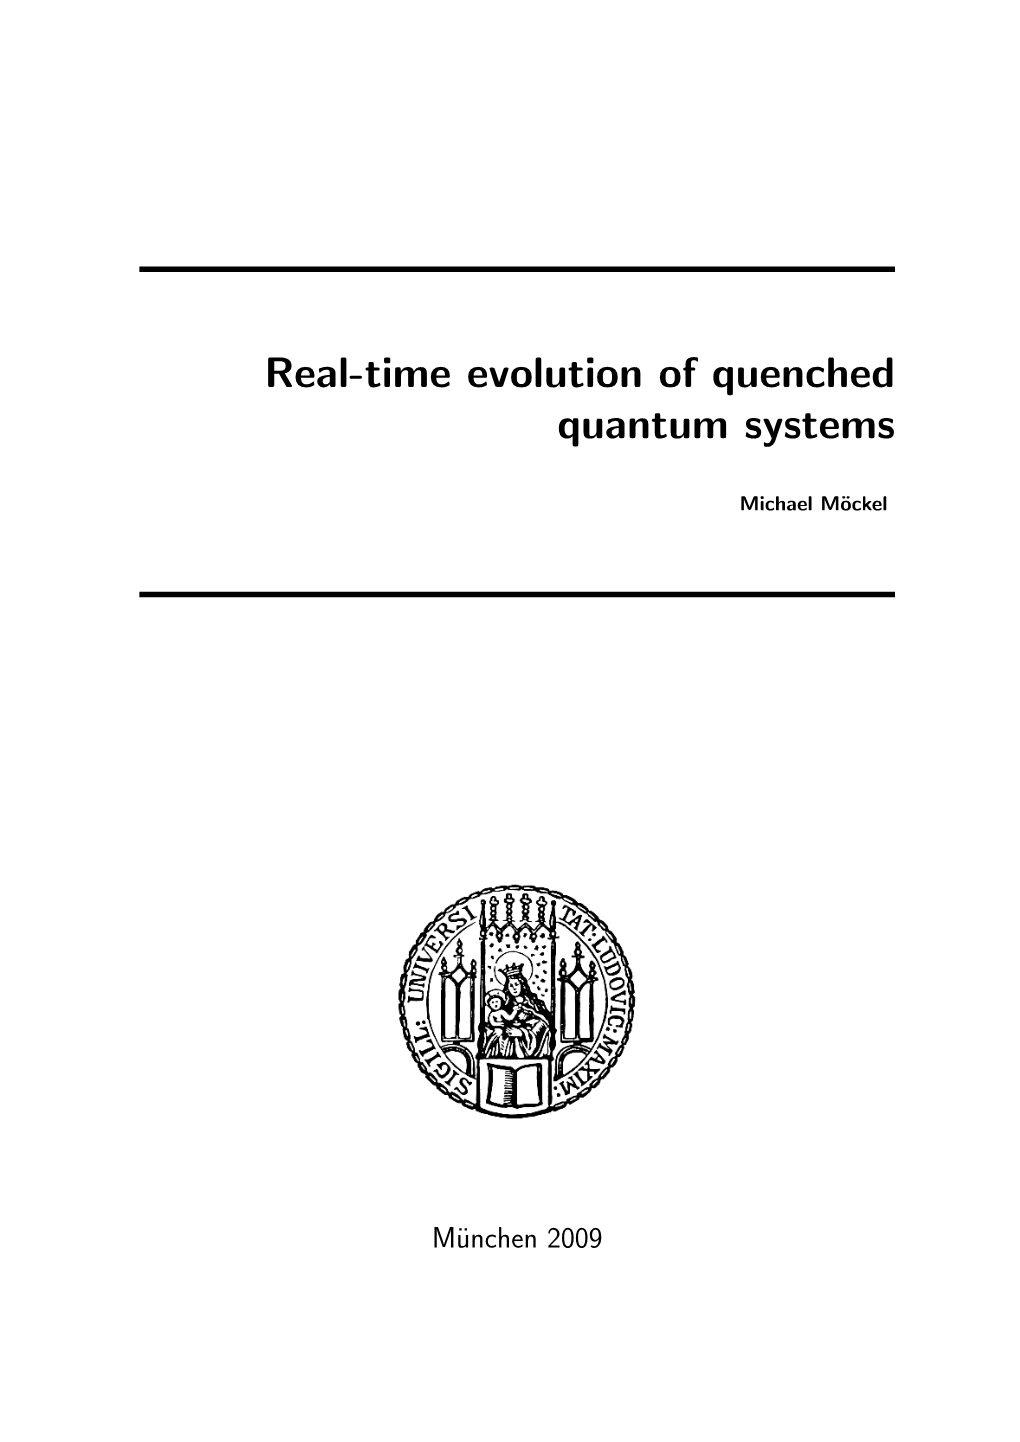 Real-Time Evolution of Quenched Quantum Systems